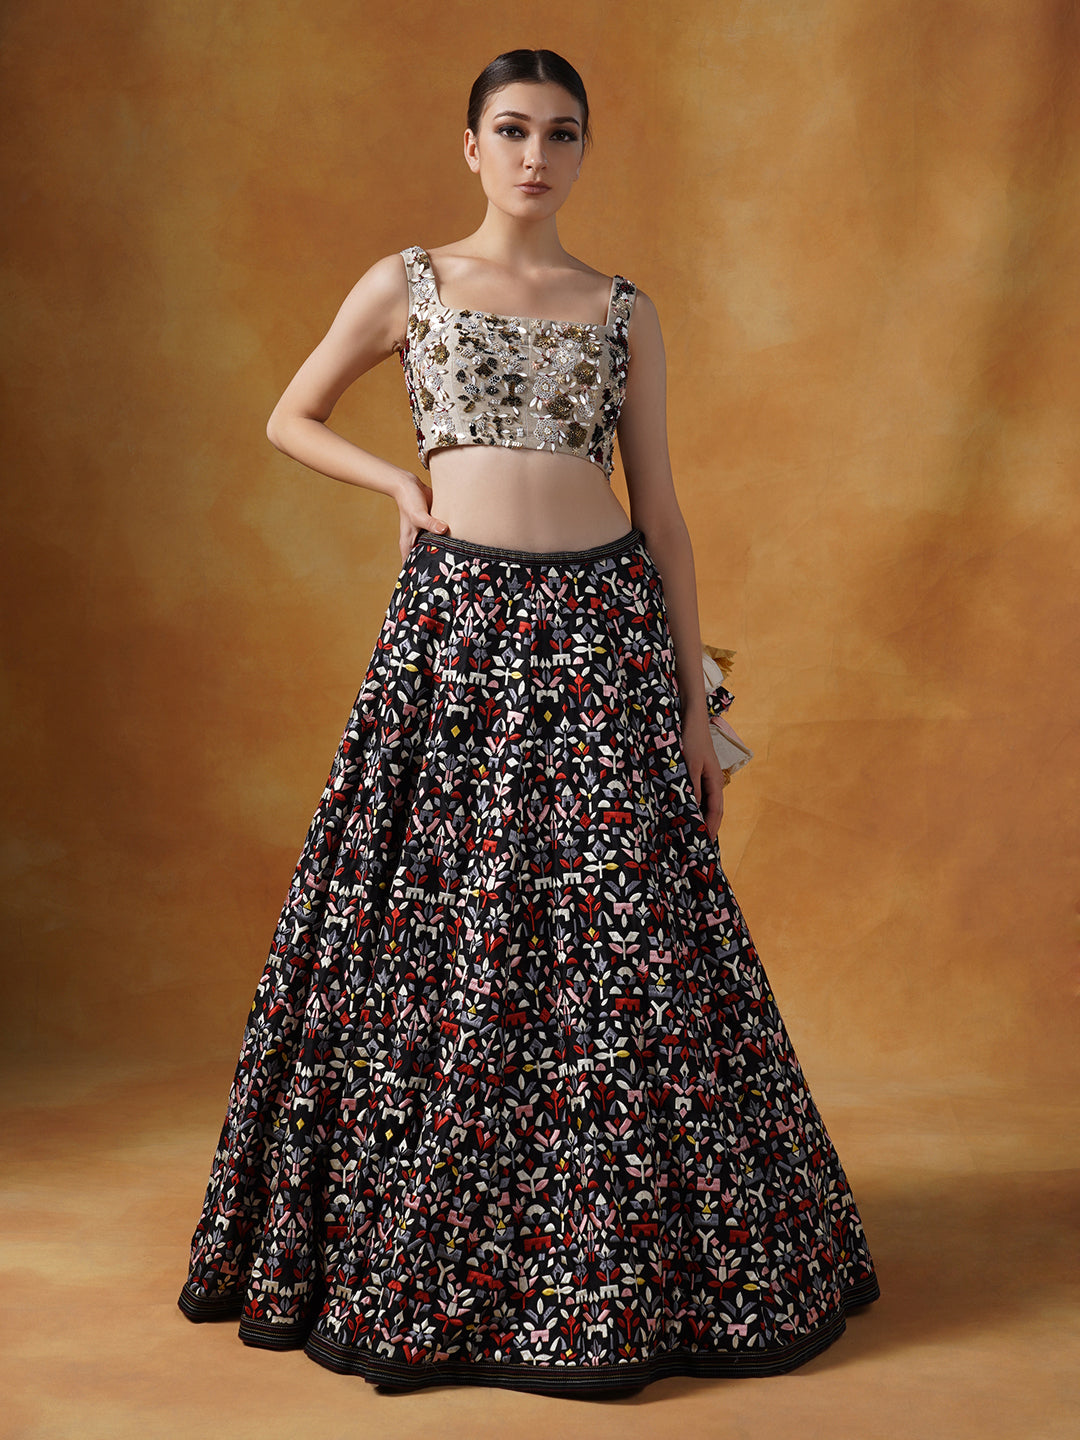 Organza jacket with black appliqué work, topped over a lehenga set